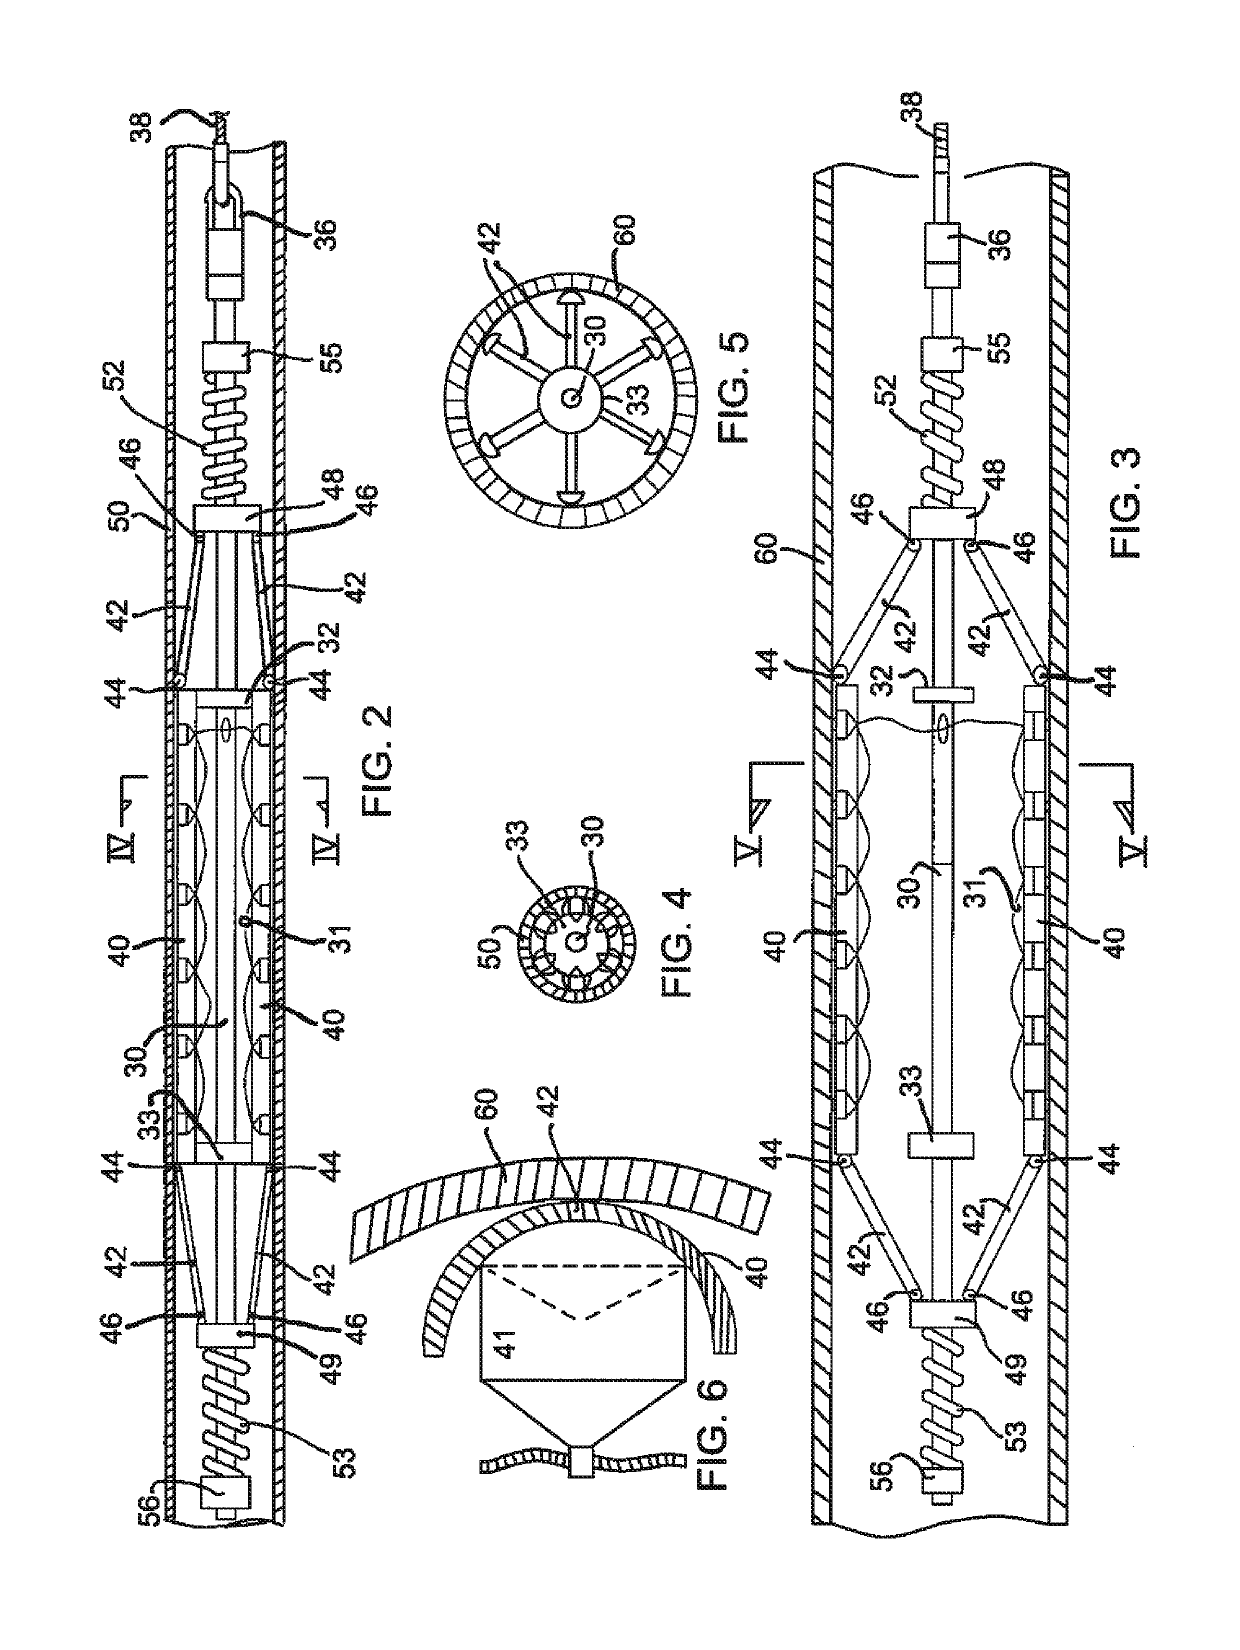 Total control perforator and system